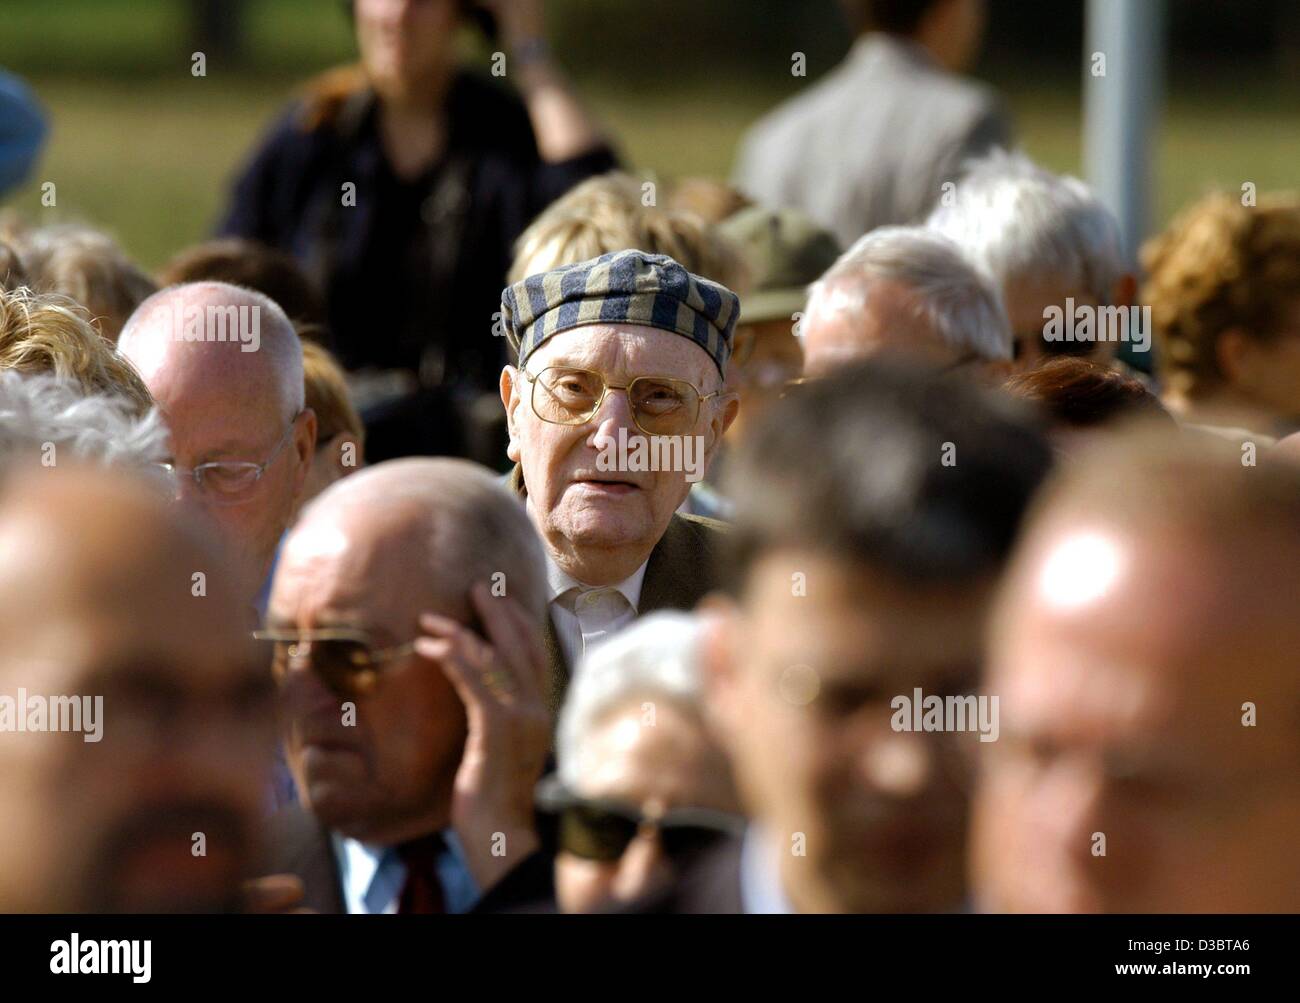 (dpa) - Former prisoners listen to a speech during a commemoration ceremony at the former Nazi concentration camp Neuengamme in Hamburg, 6 September 2003. About 300 former prisoners and surviving members of their families came to commemorate the victims of the holocaust. The SS established the Neuen Stock Photo